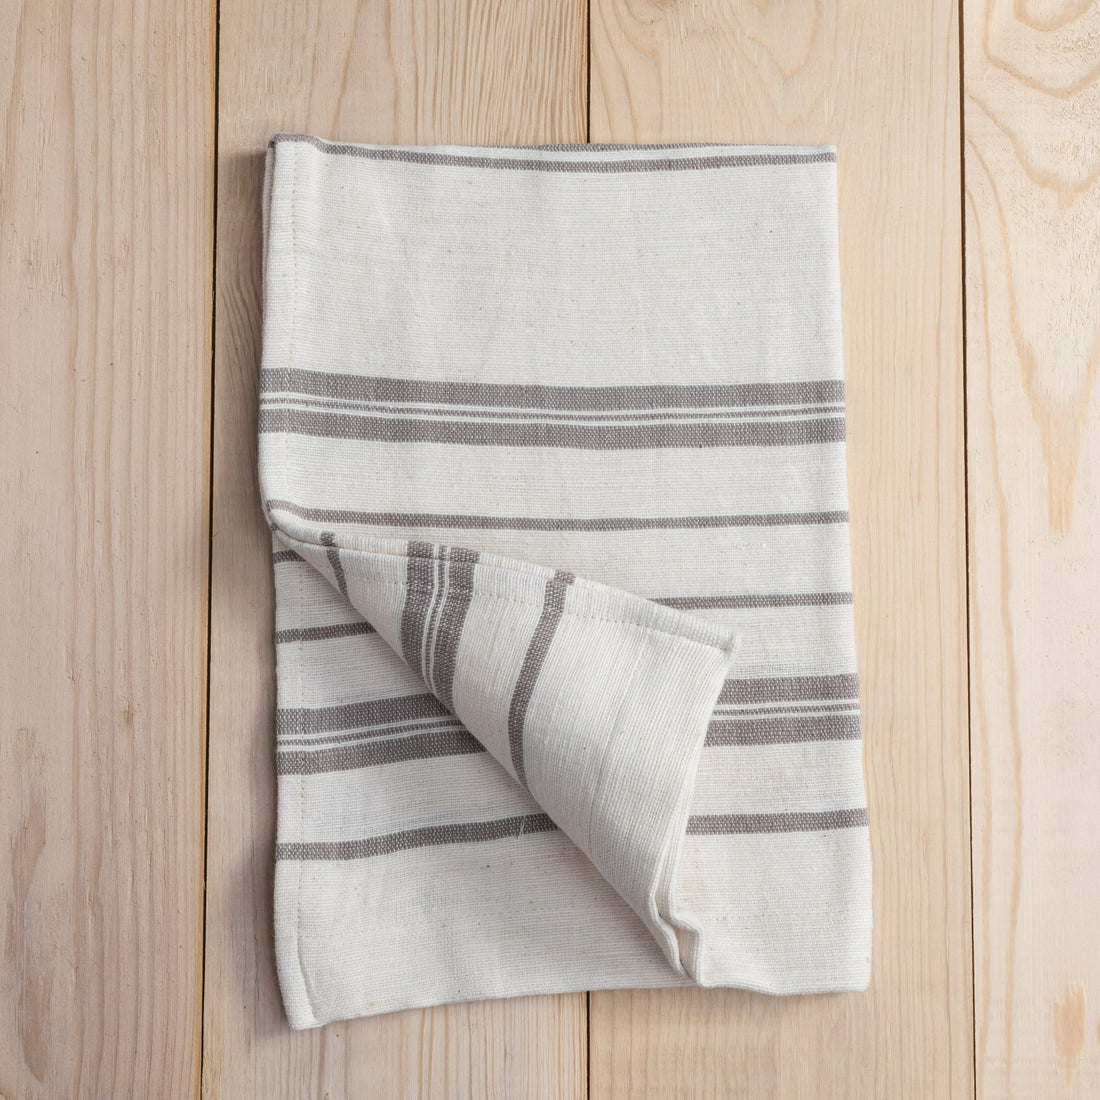 Avery Hand Towel, Natural with Stone